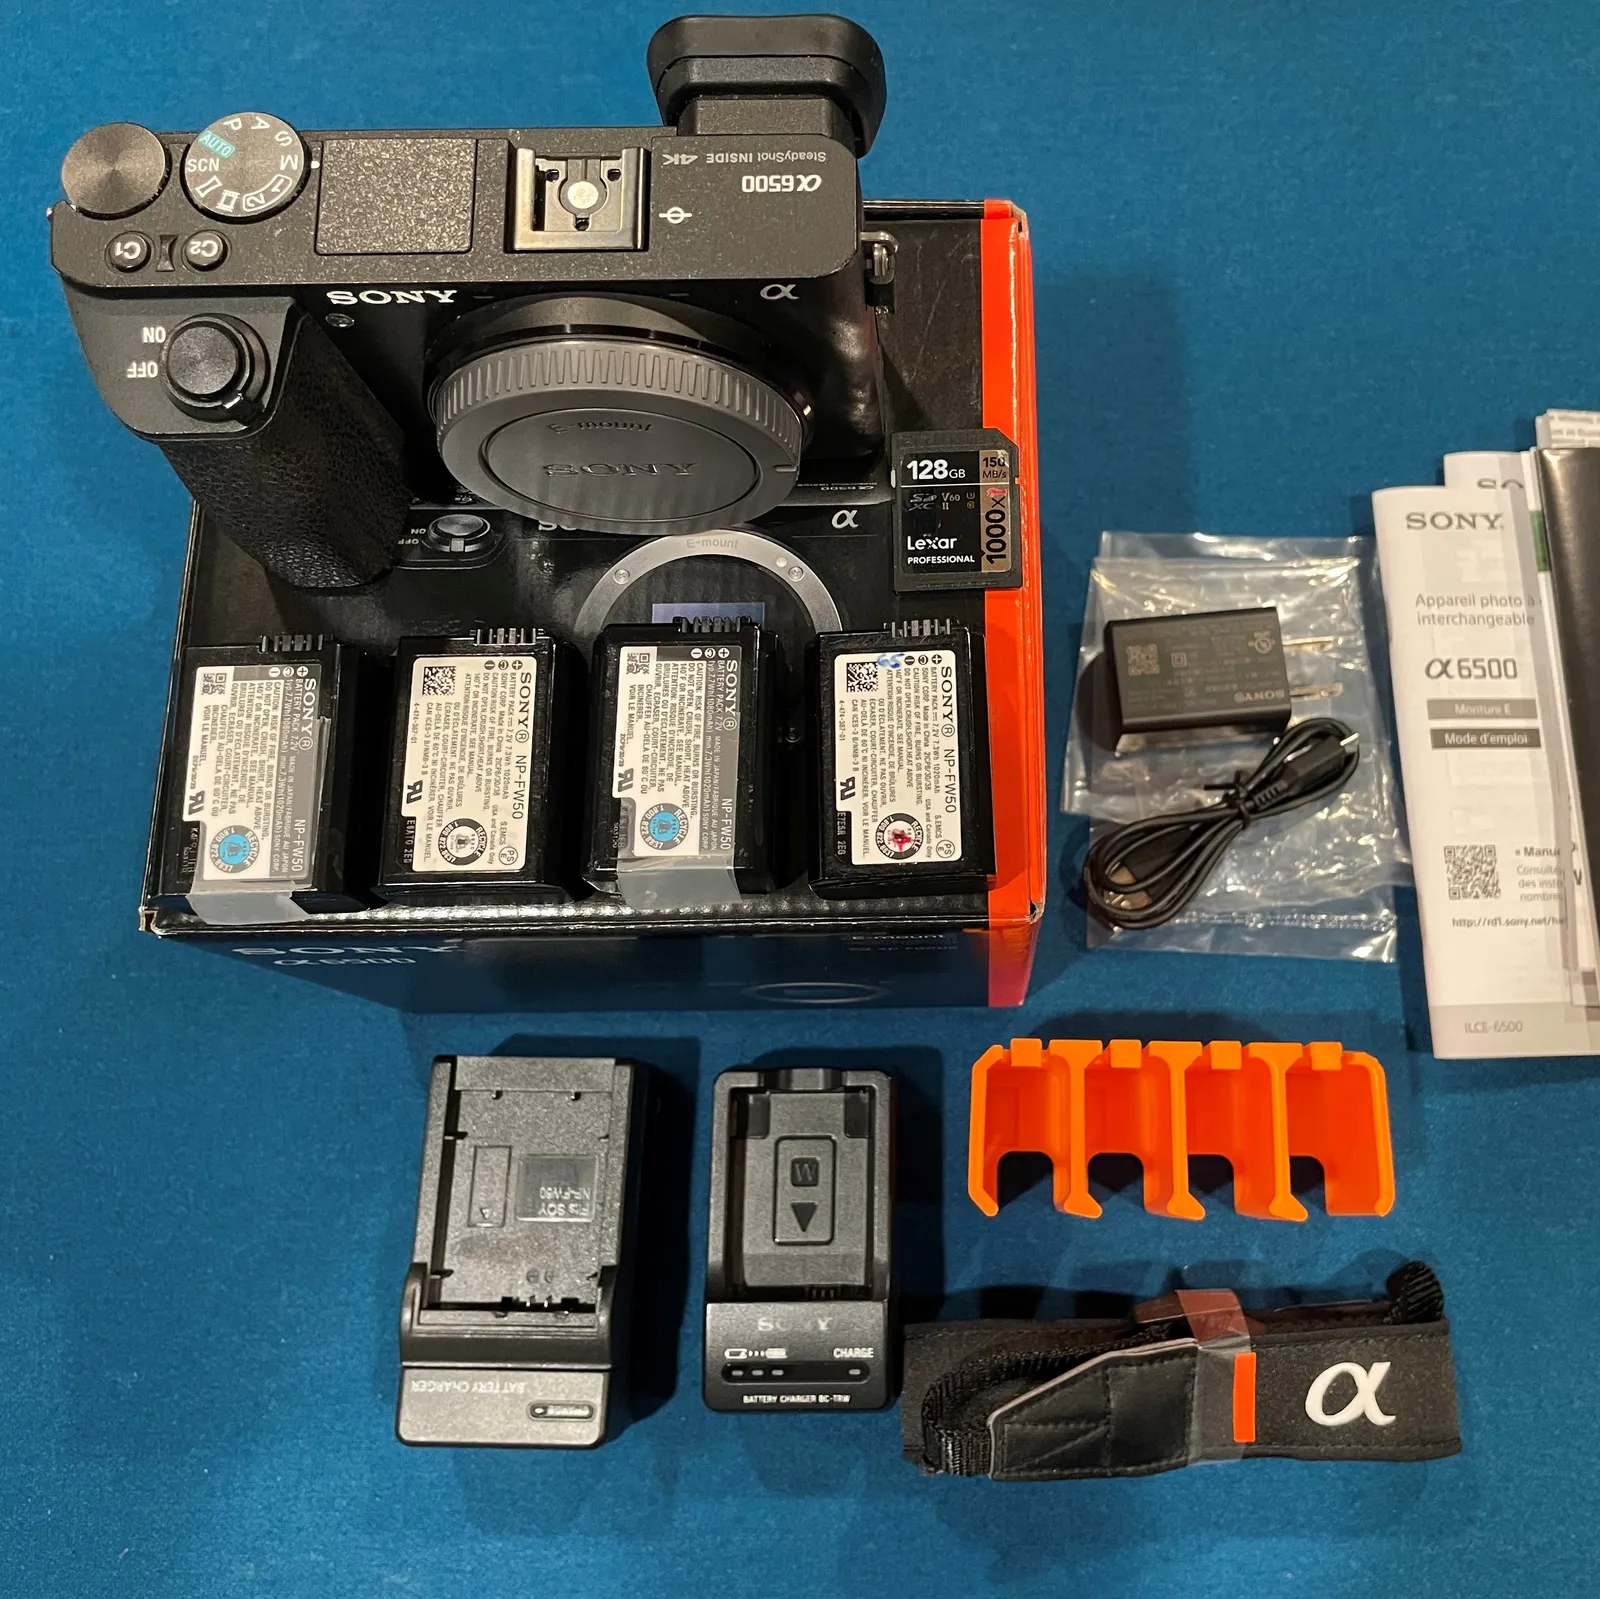 Sony a6500 body with extra batterys and 128g Memory Card